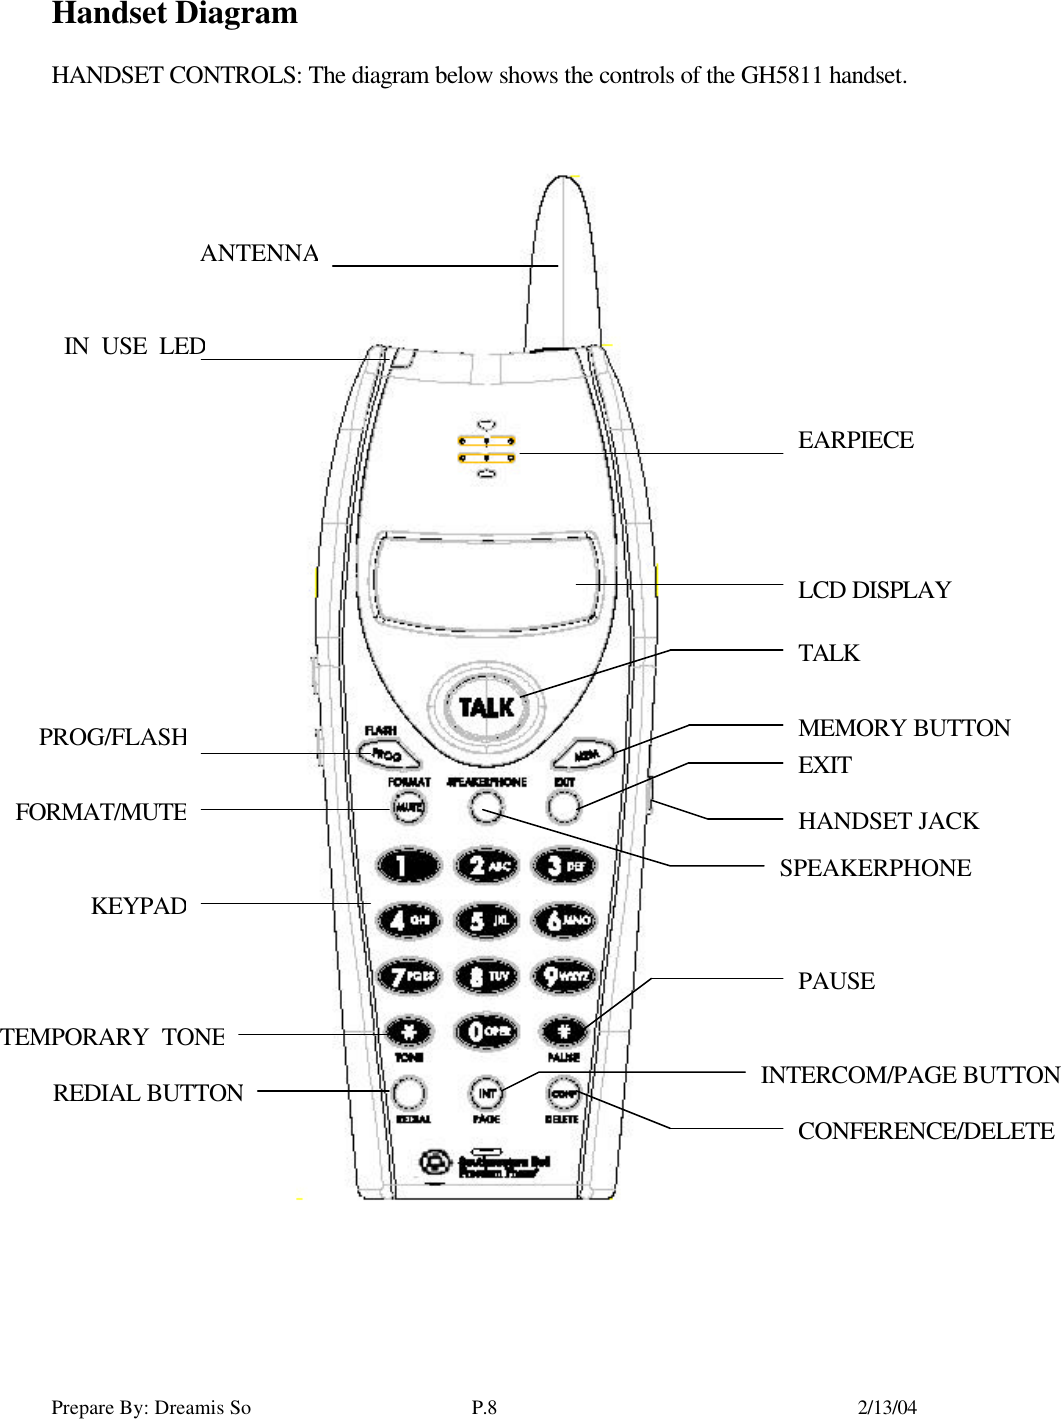 Prepare By: Dreamis So P.8    2/13/04 Handset Diagram  HANDSET CONTROLS: The diagram below shows the controls of the GH5811 handset.  ANTENNAEARPIECE LCD DISPLAY IN USE LEDPROG/FLASHFORMAT/MUTETALK MEMORY BUTTON EXIT SPEAKERPHONE KEYPADPAUSE TEMPORARY TONEREDIAL BUTTONINTERCOM/PAGE BUTTON CONFERENCE/DELETE HANDSET JACK 